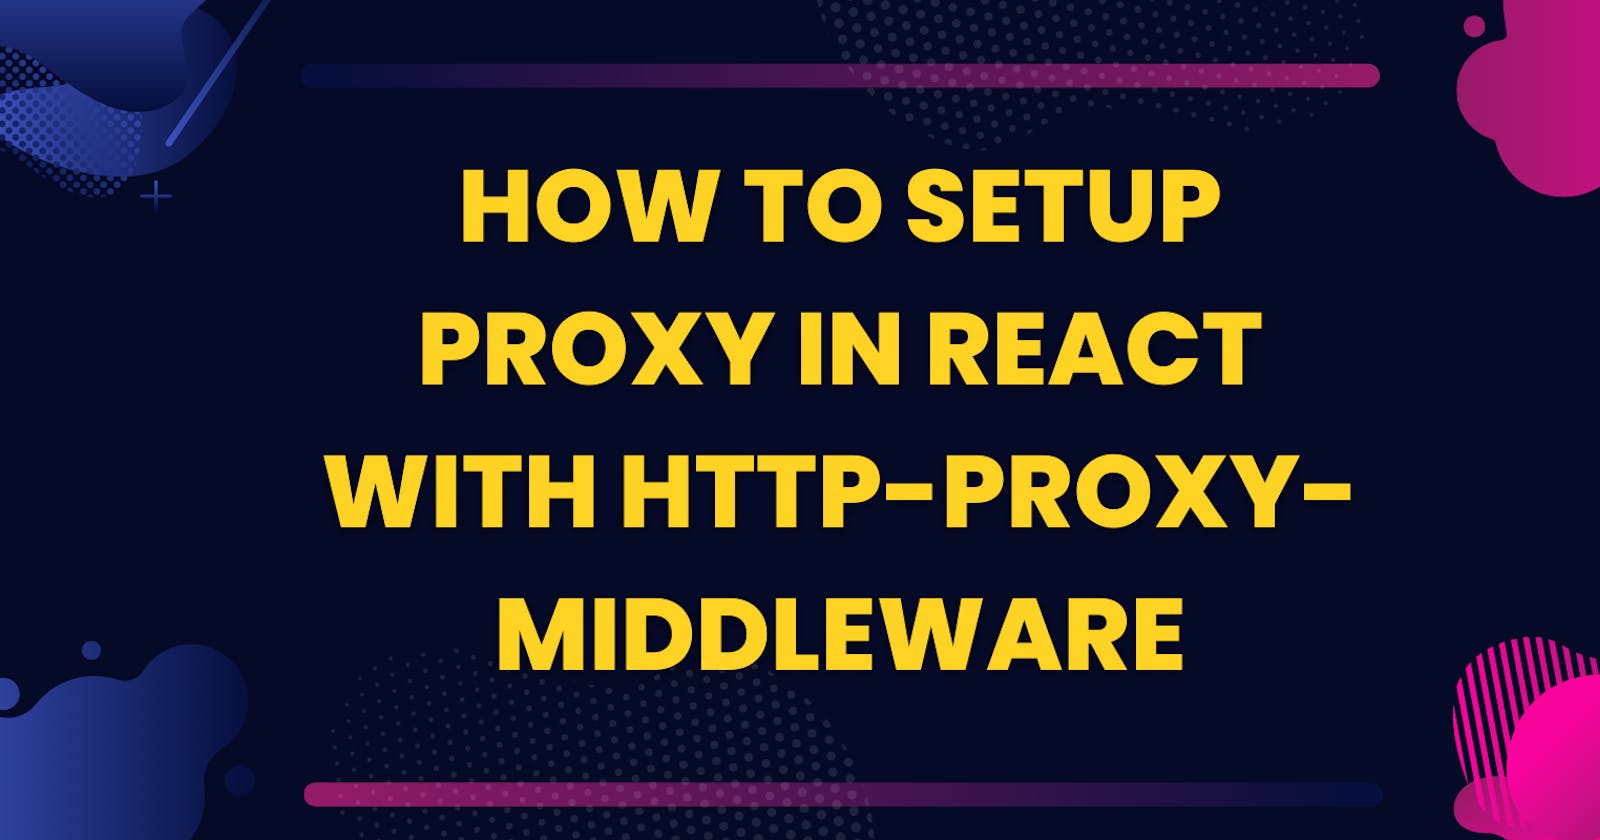 How to Setup Proxy in React with http-proxy-middleware